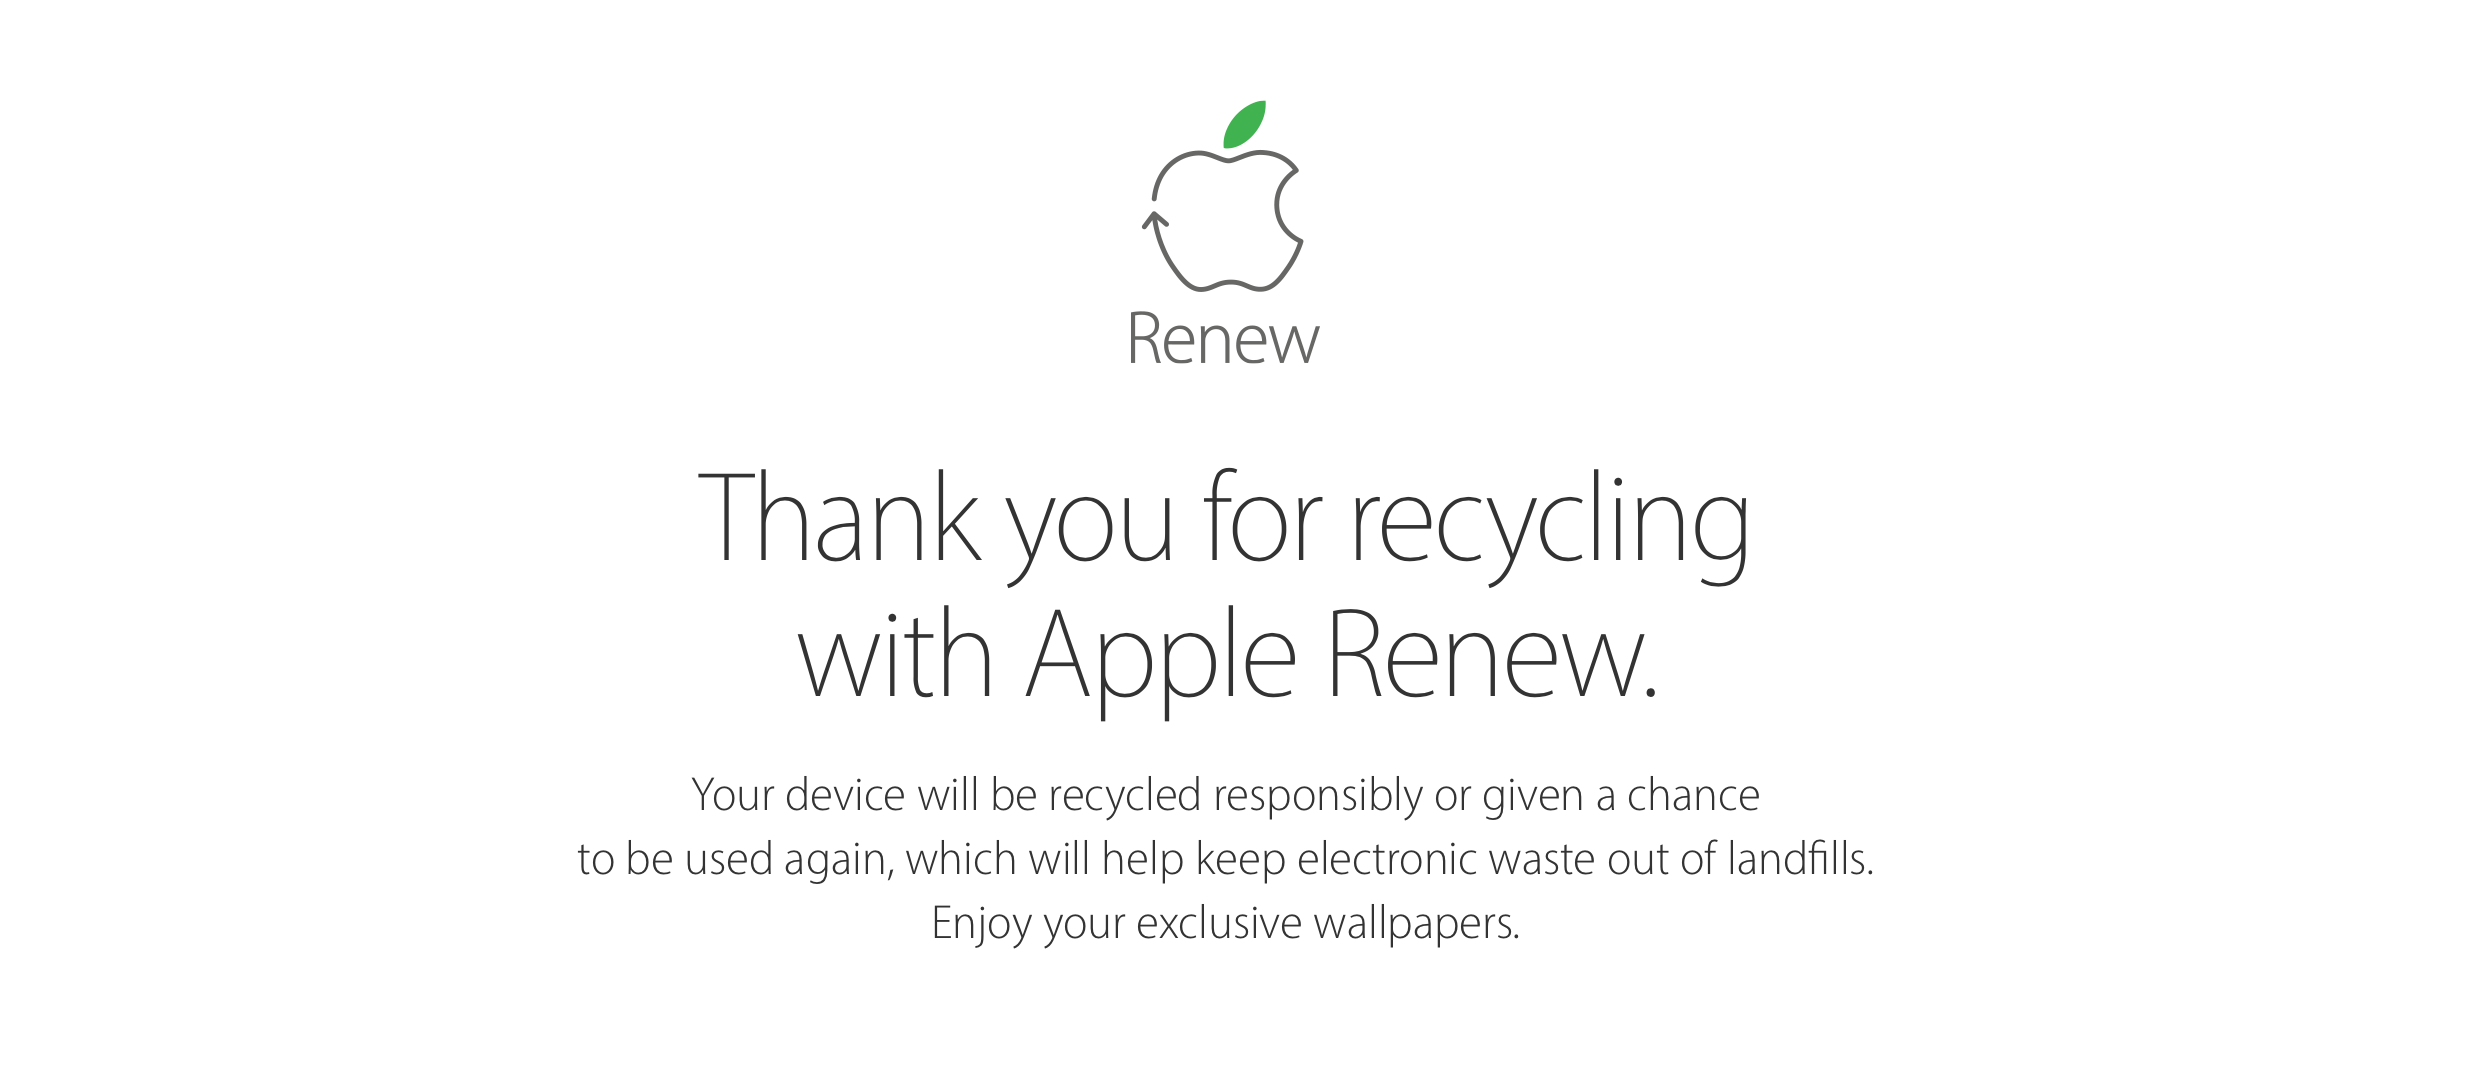 go to the apple website